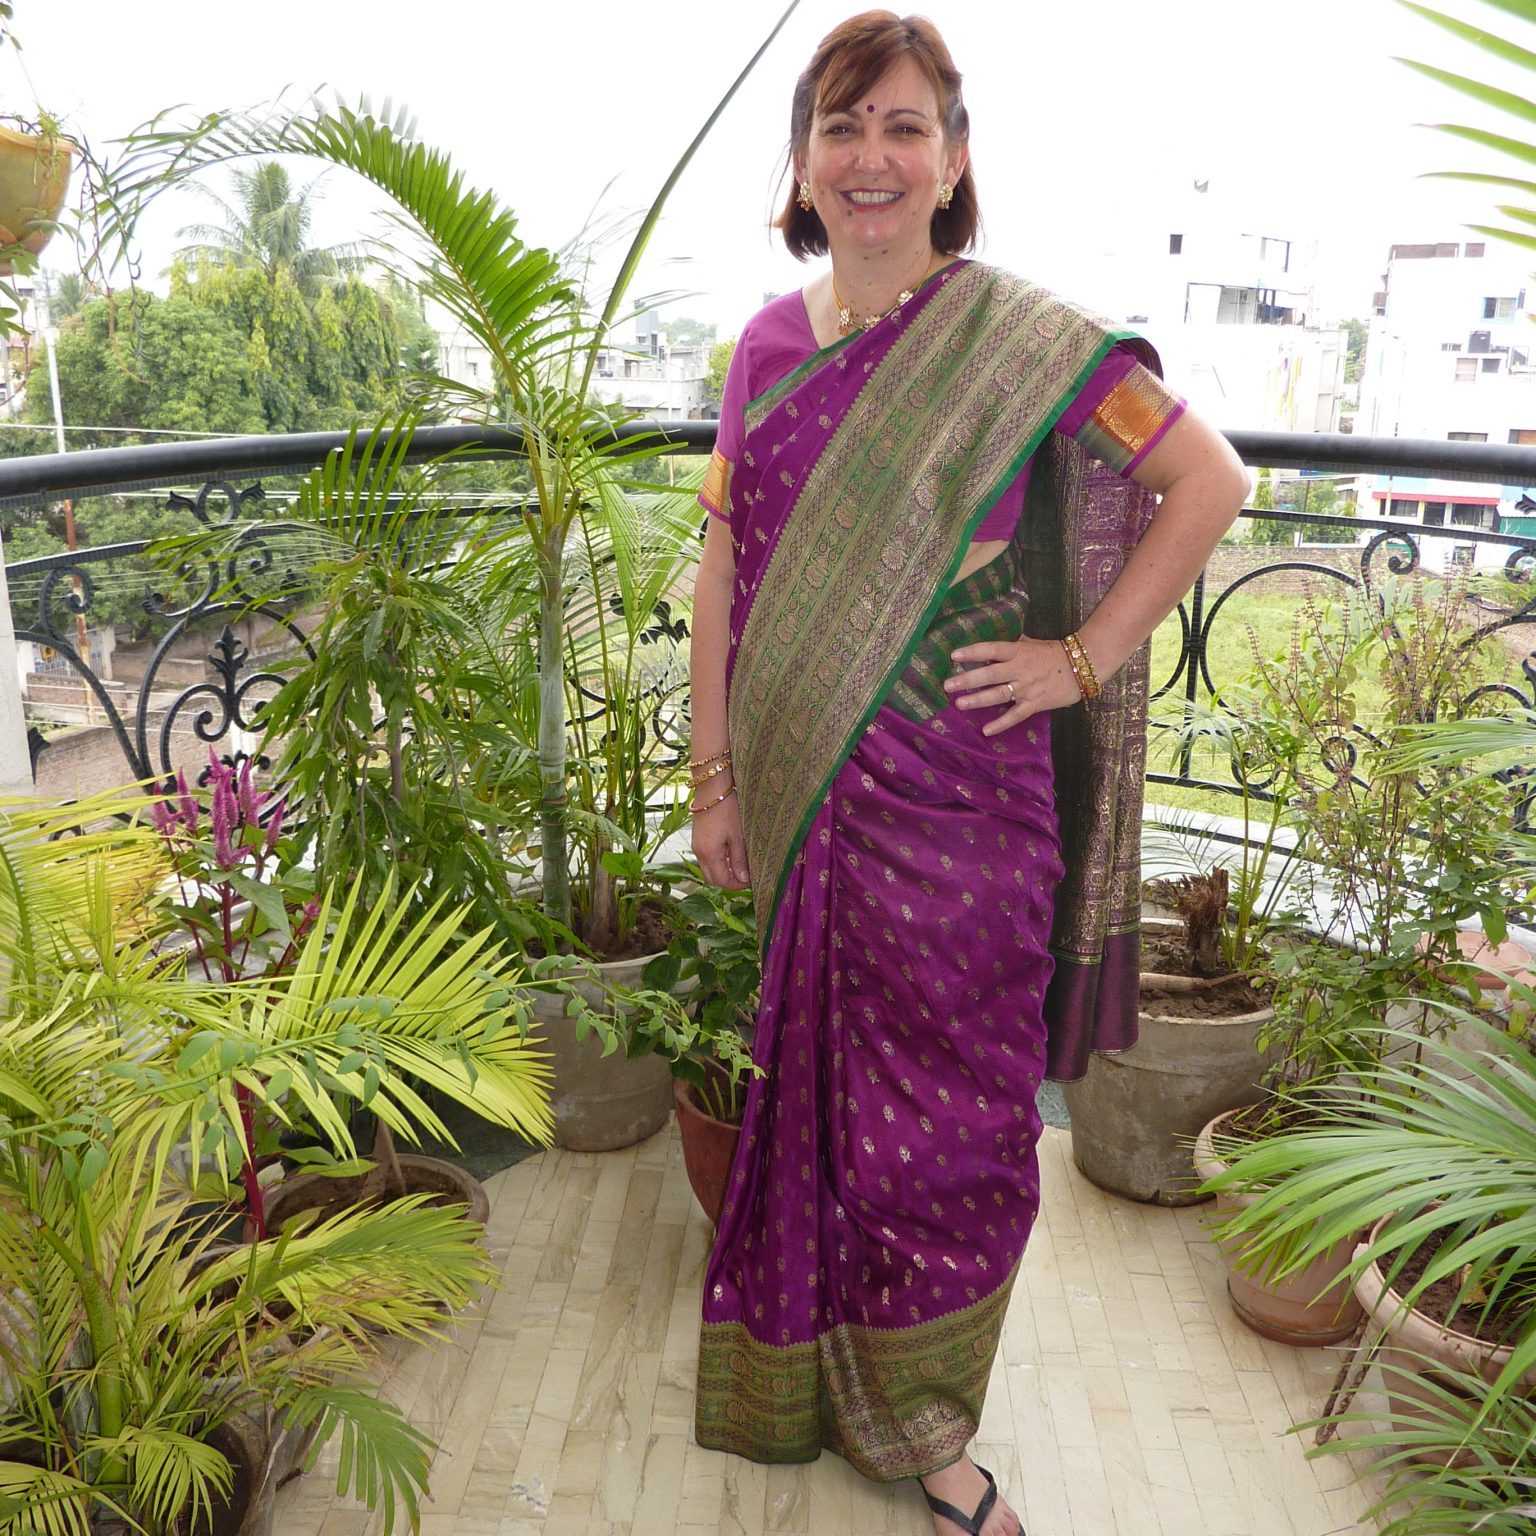 Another amazing sari on our Incredible India trip